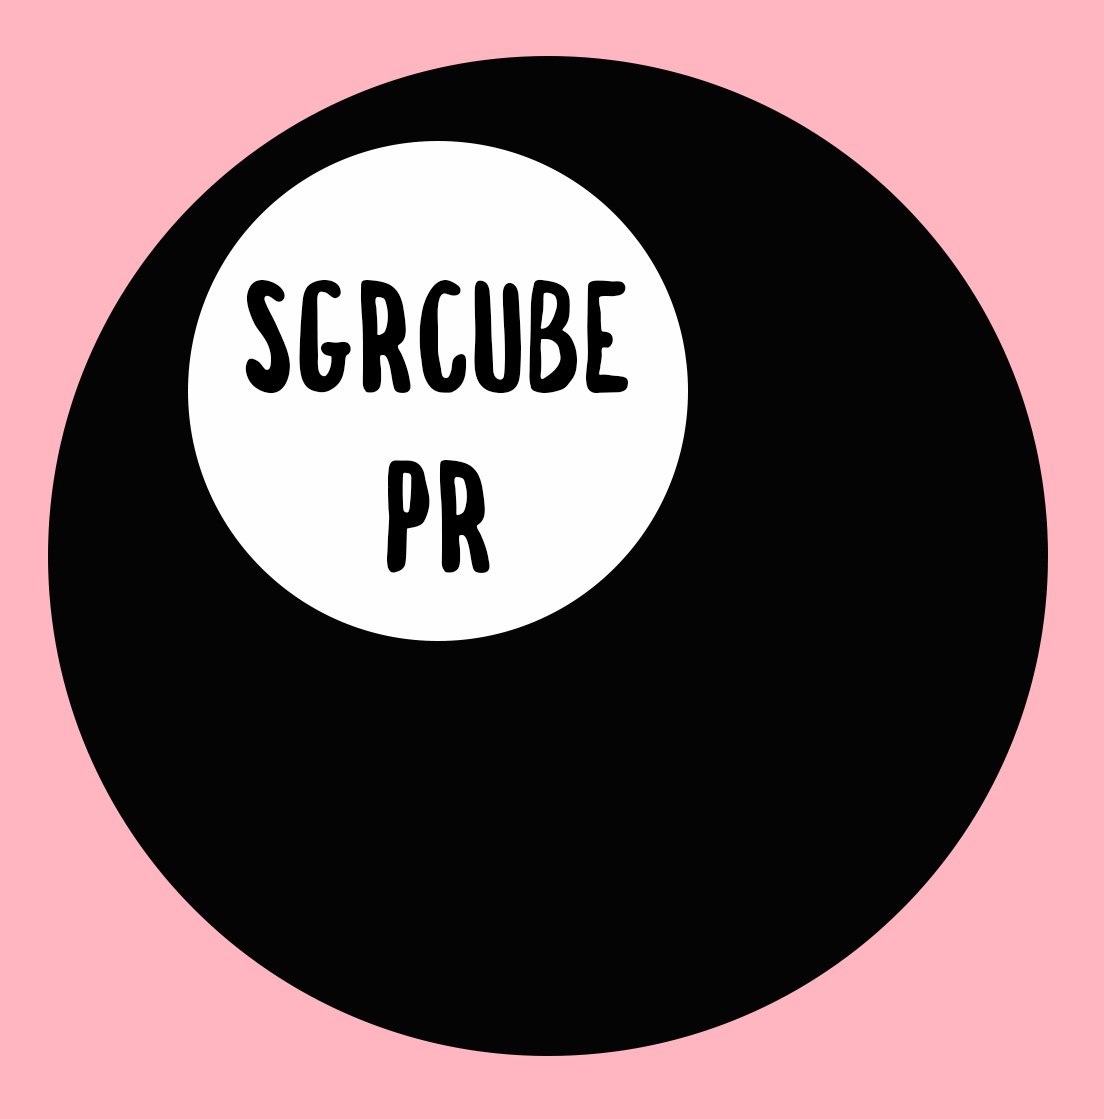 Bristol based, independent radio promotion ✨📻 
Current projects: Lewsberg
Contact: laura@sgrcube.com